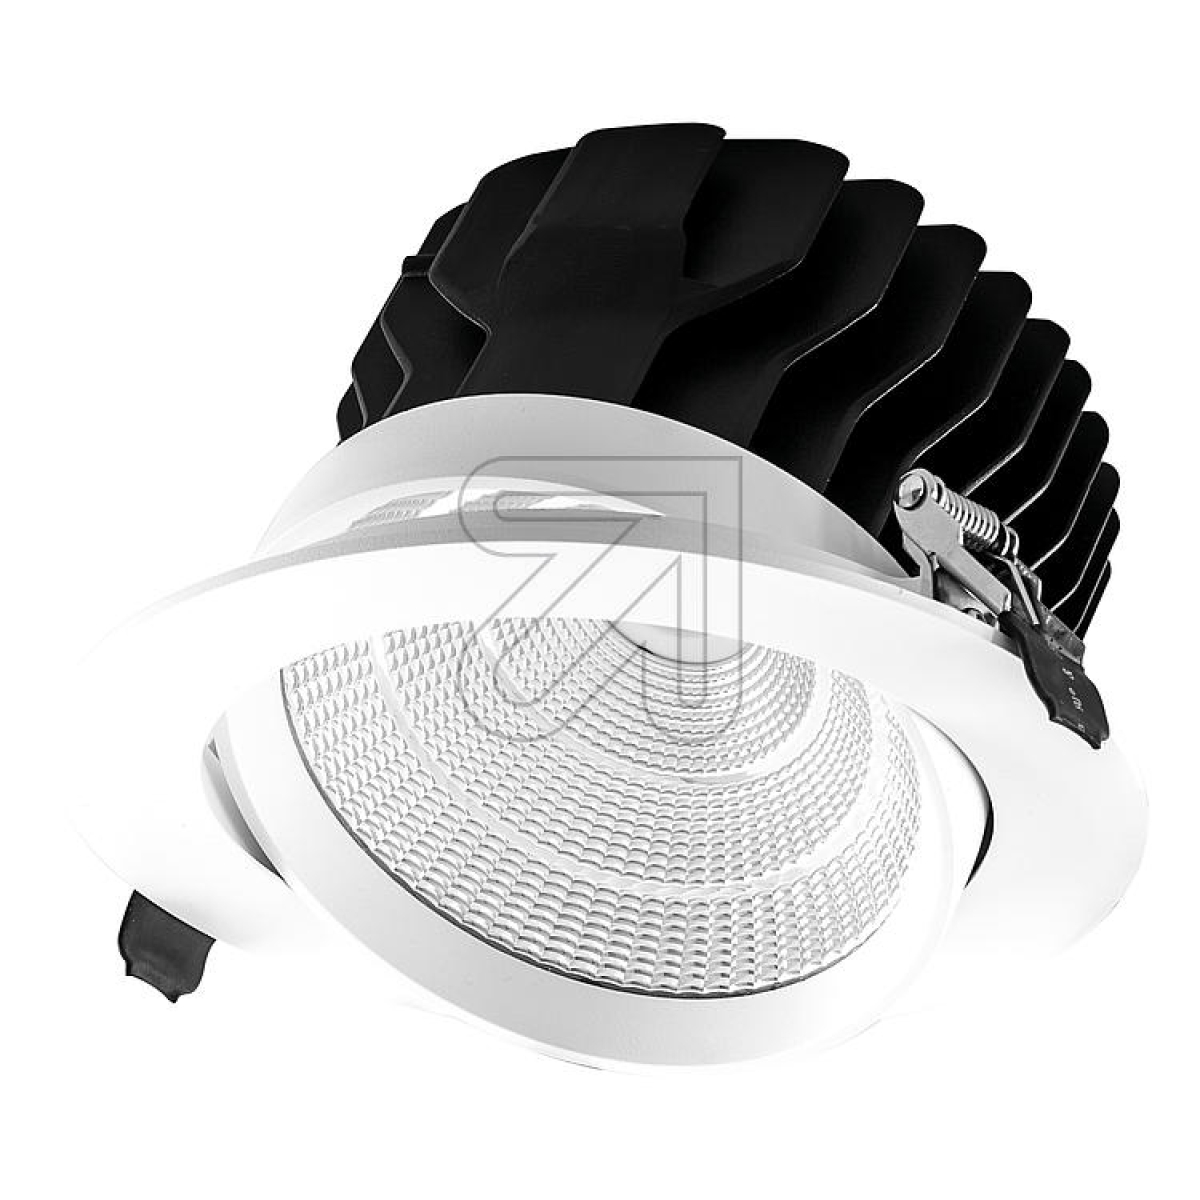 EVNLED recessed spotlight round white 3000K 38W PC20400102 swivelingArticle-No: 670110